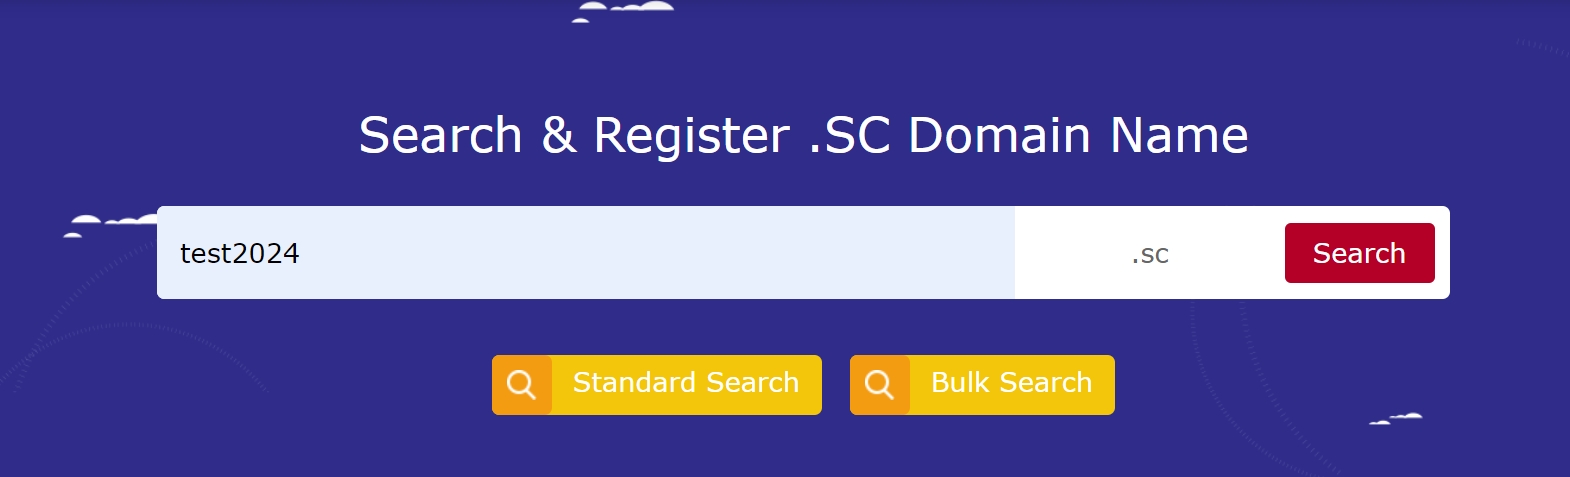 What is the quick way to register a .sc domain name? What are its advantages?